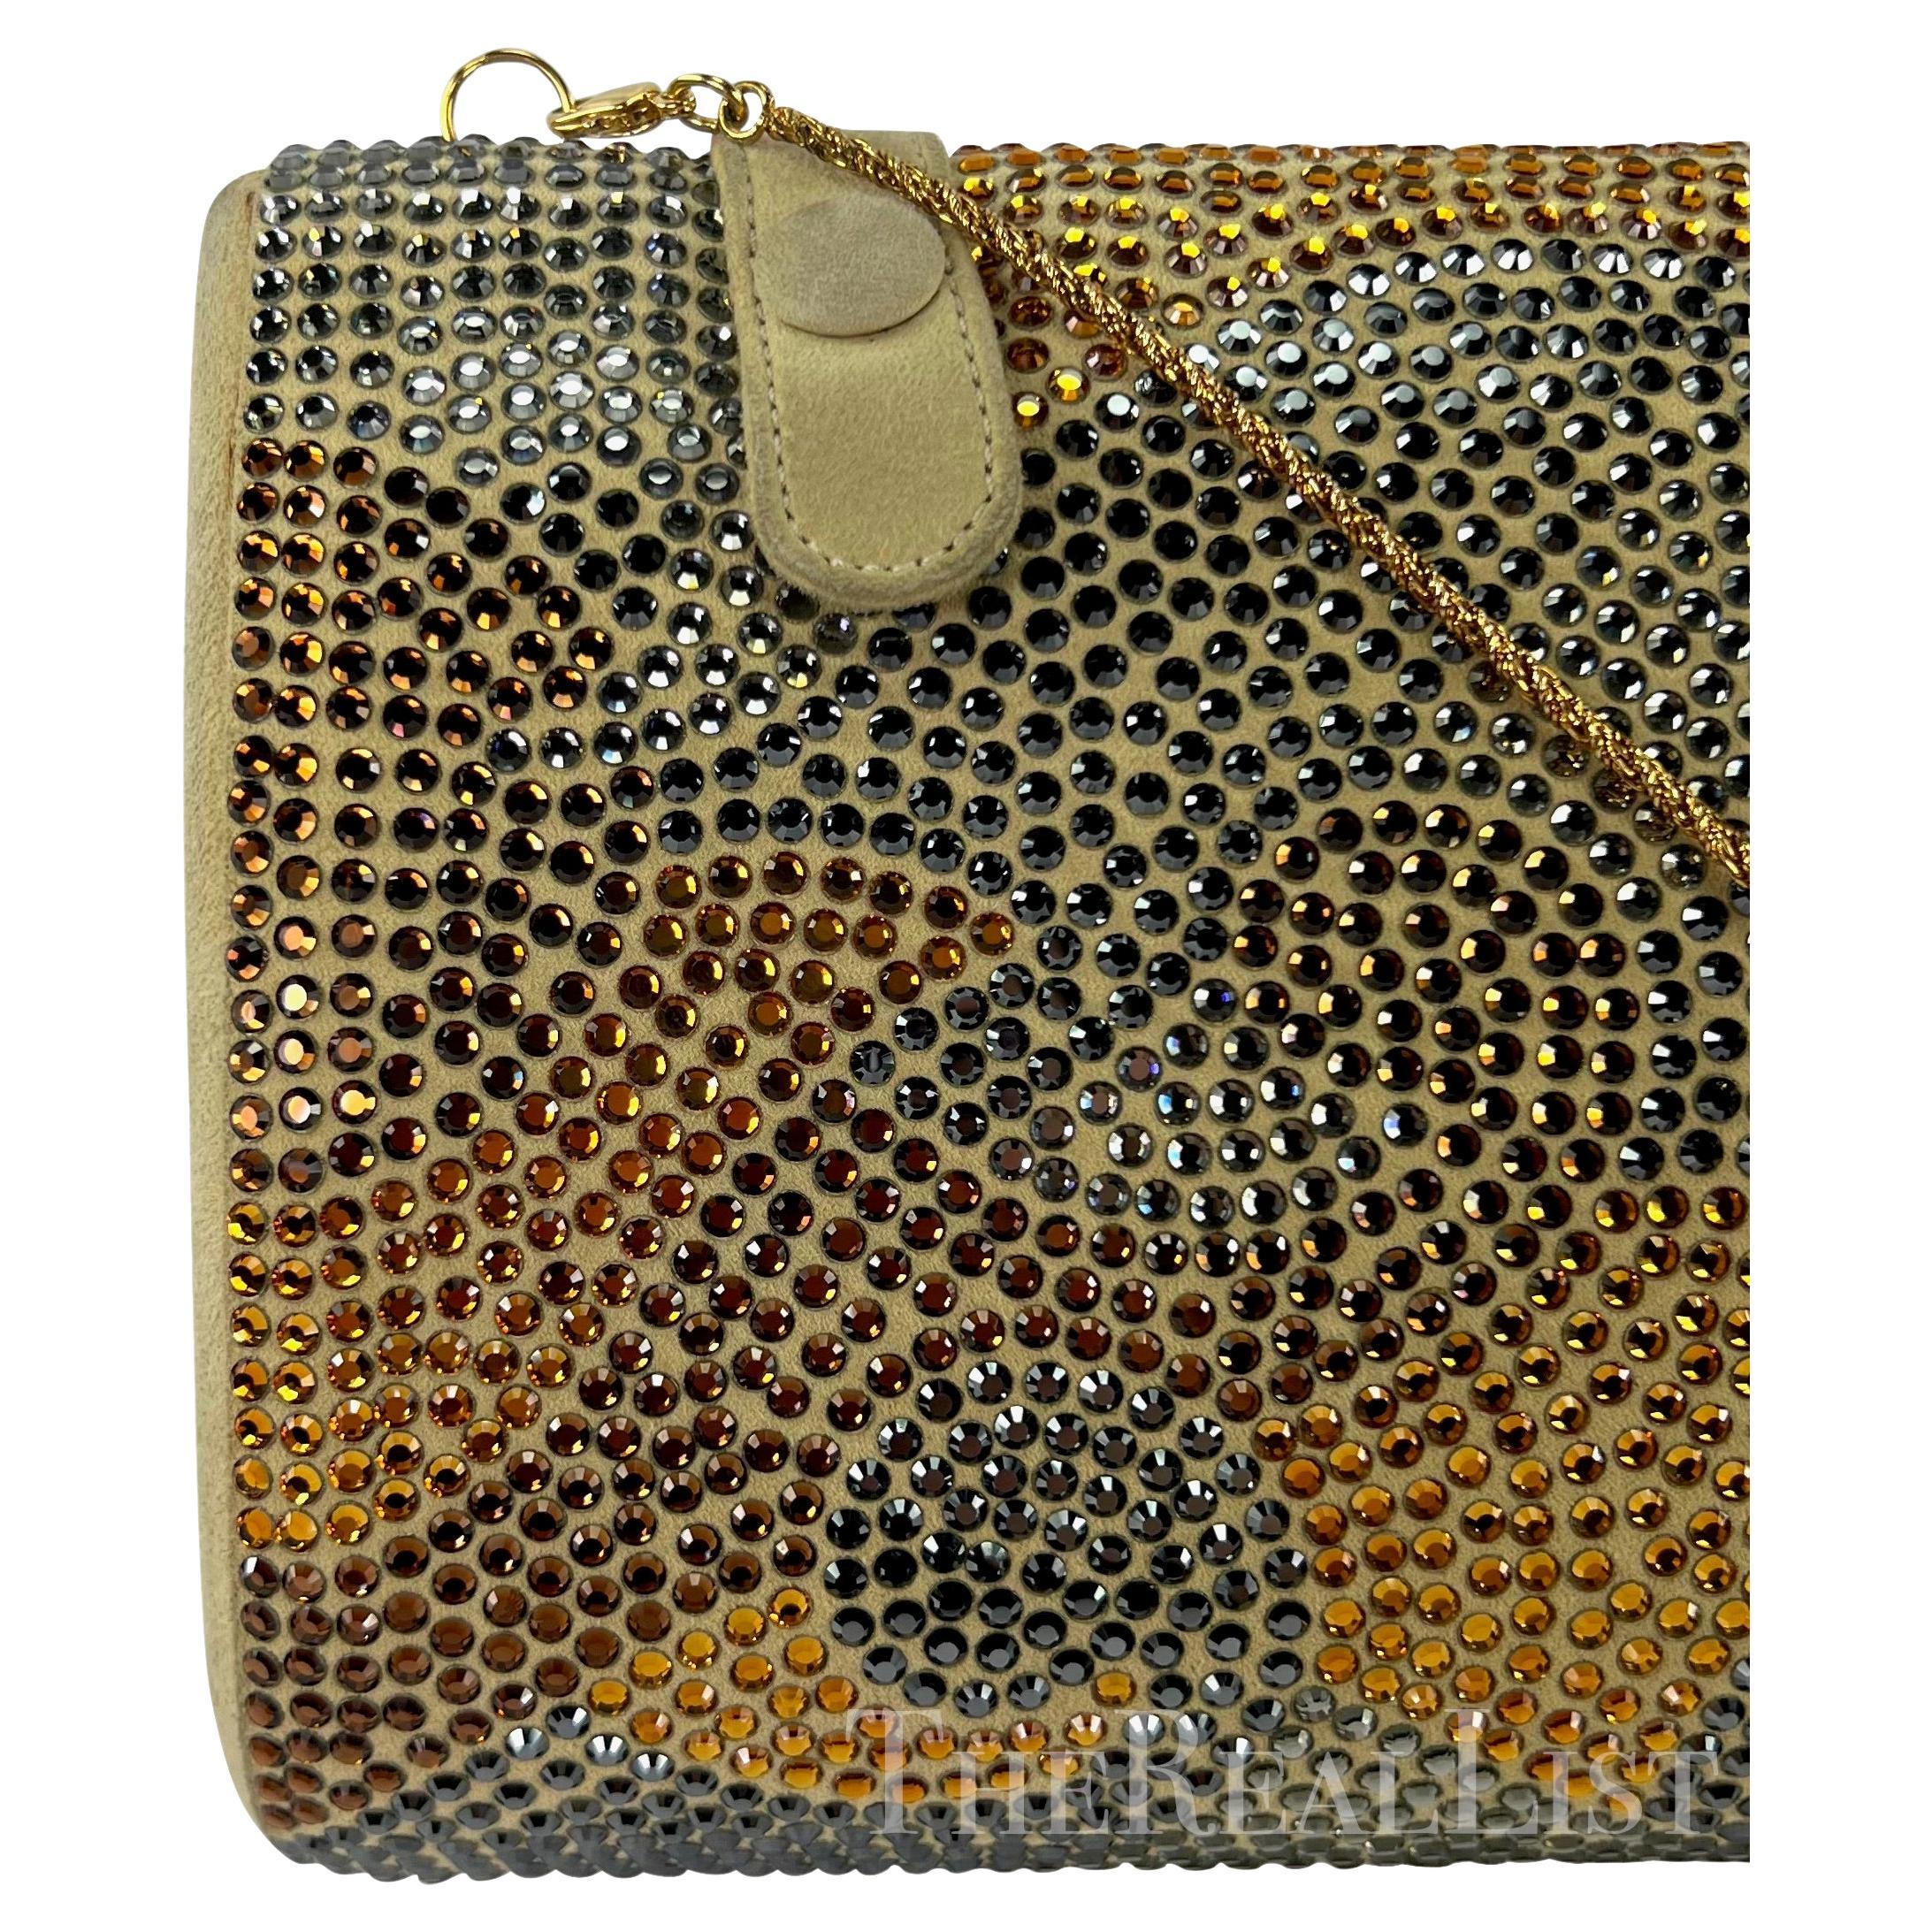 S/S 2000 Gianni Versace by Donatella Runway Gold Abstract Rhinestone Clutch For Sale 1